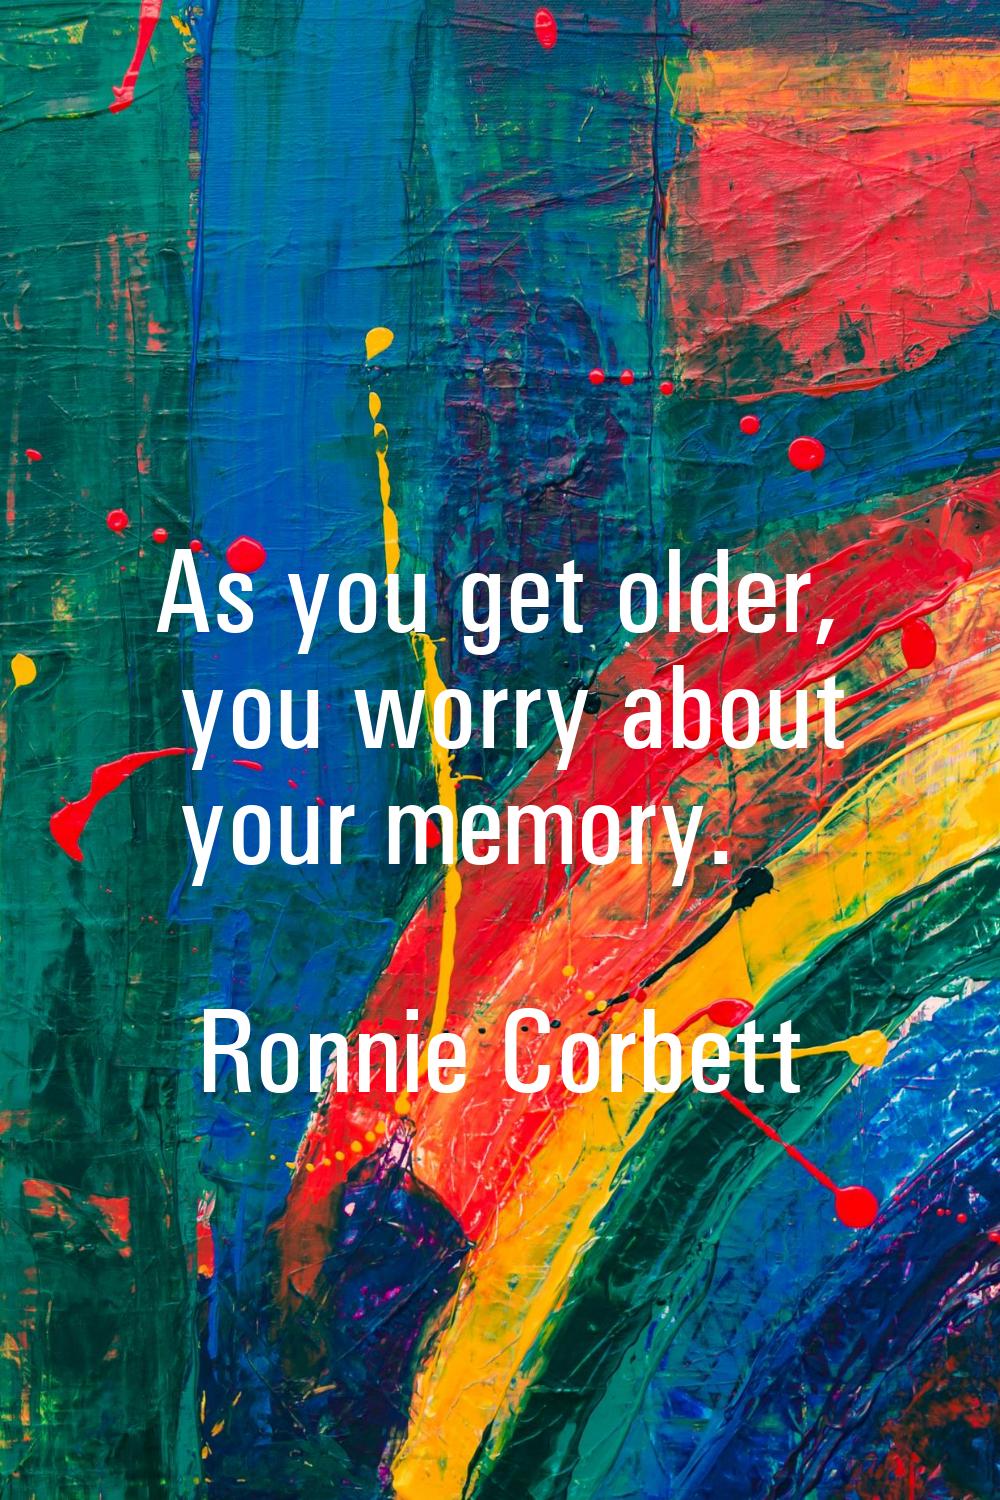 As you get older, you worry about your memory.